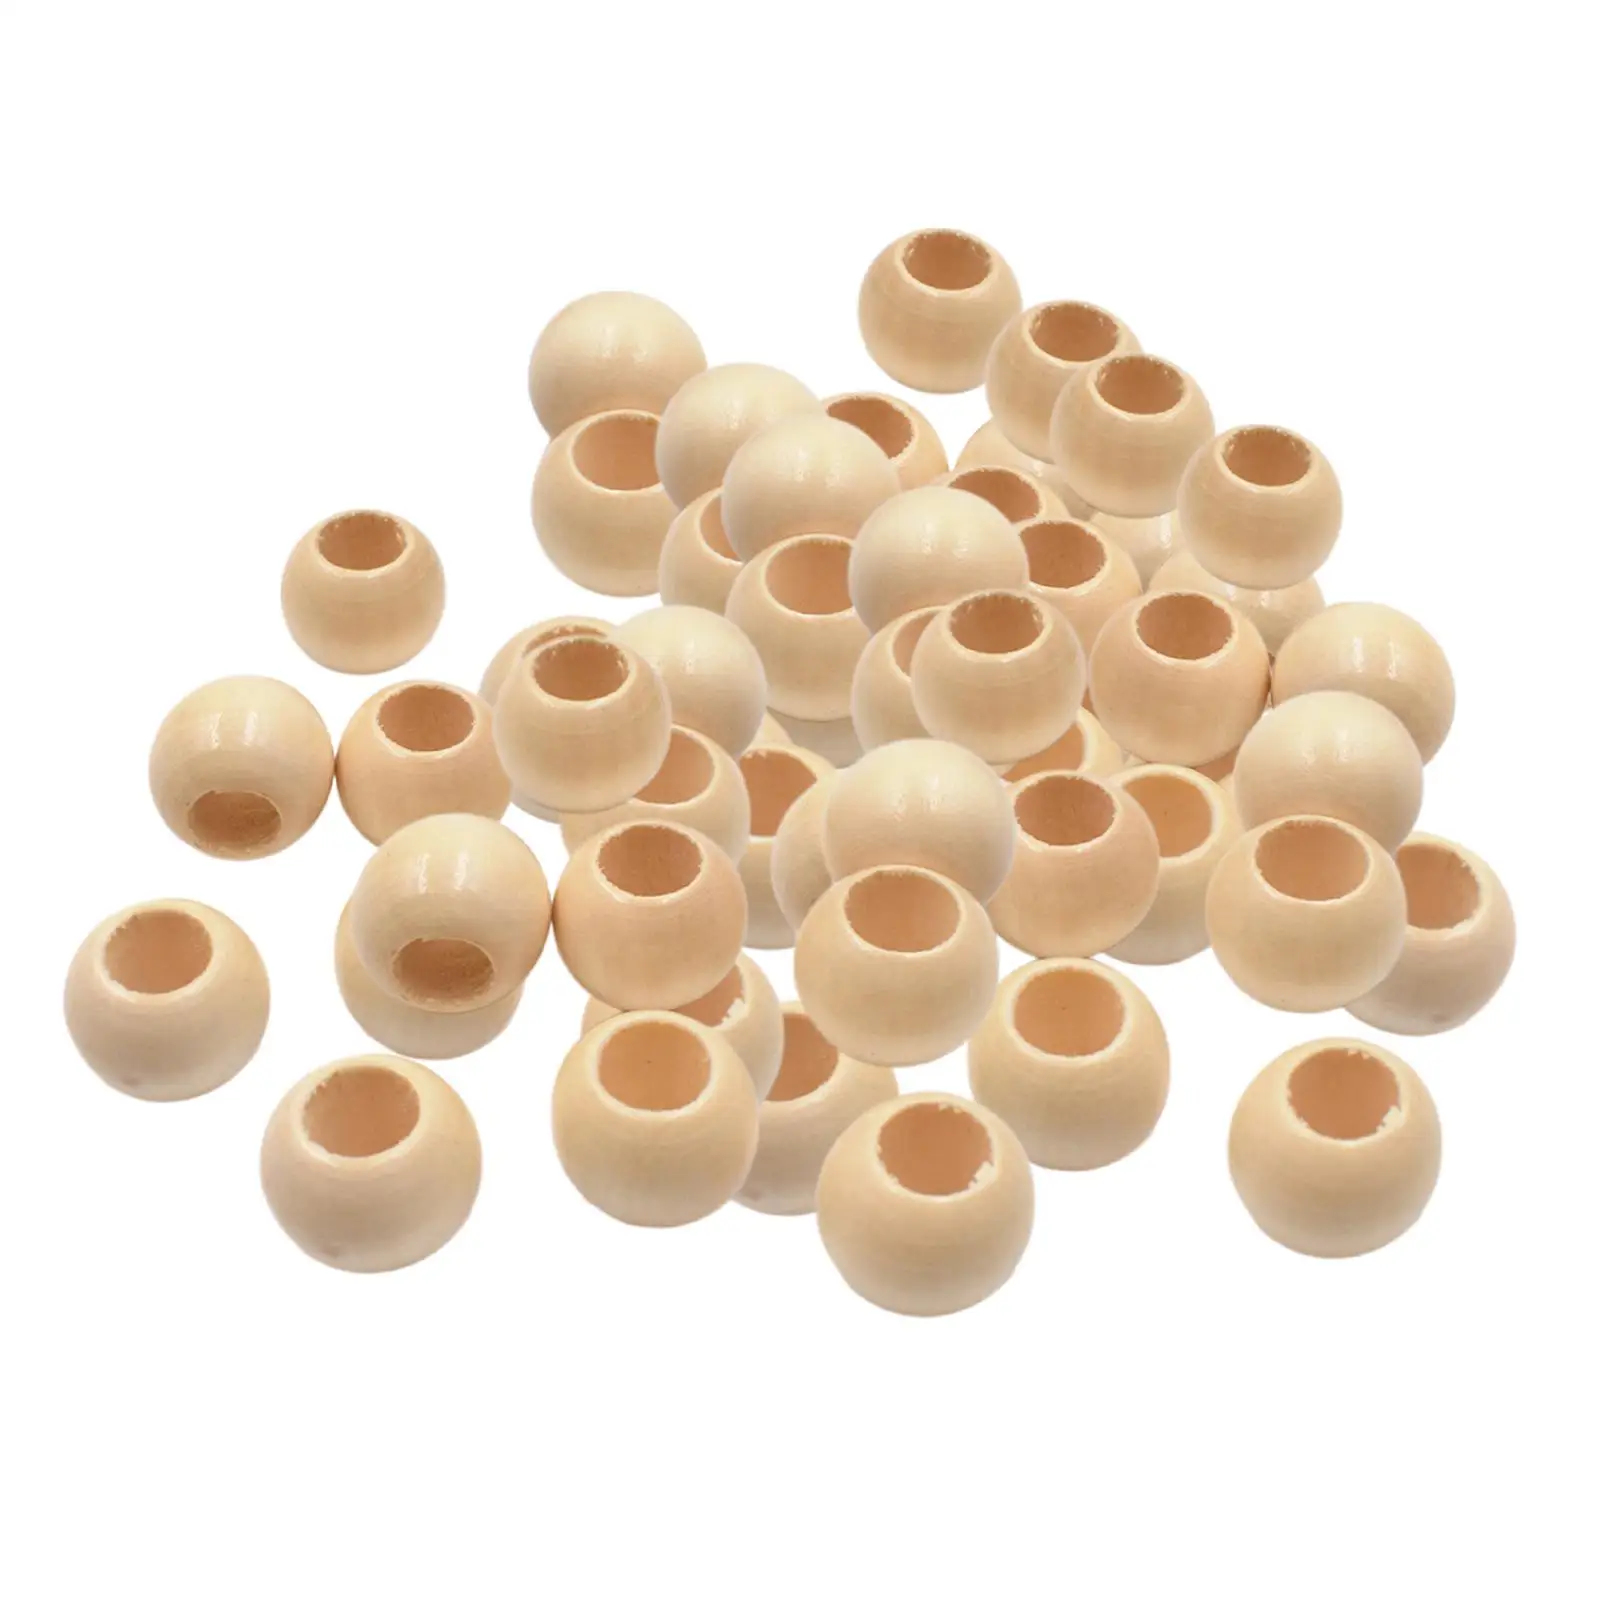 100 Pieces Wooden Beads DIY Crafts with Holes Circular Bead Loose Spacer Beads Round Beads for Jewelry Accessories Decoration